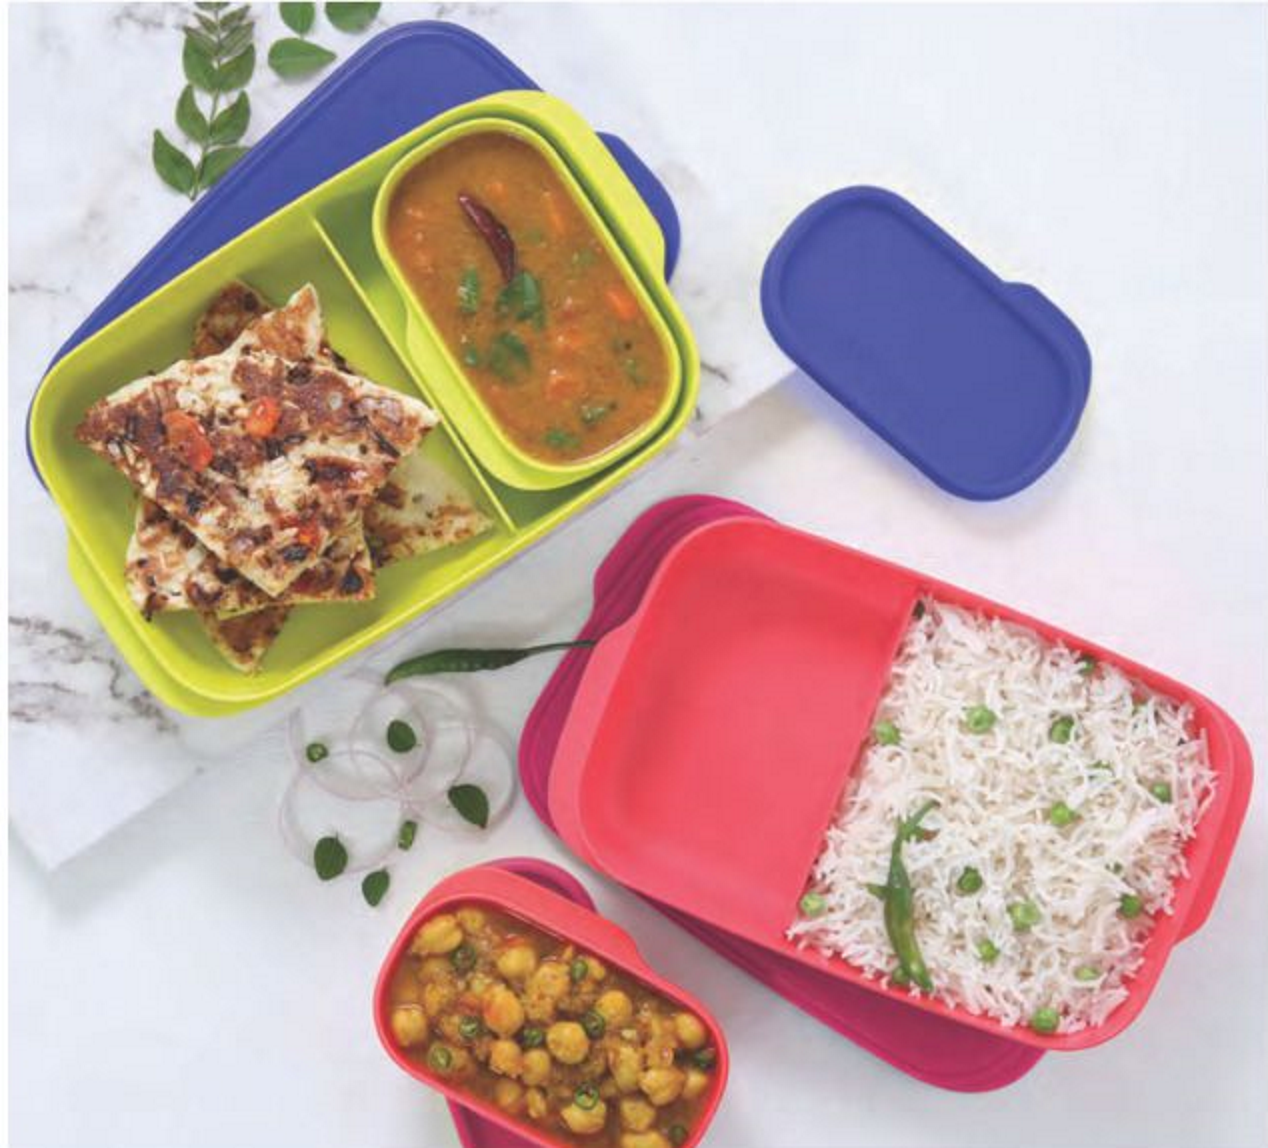 Tupperware My Lunch - A Good Companion To Carry Your Food